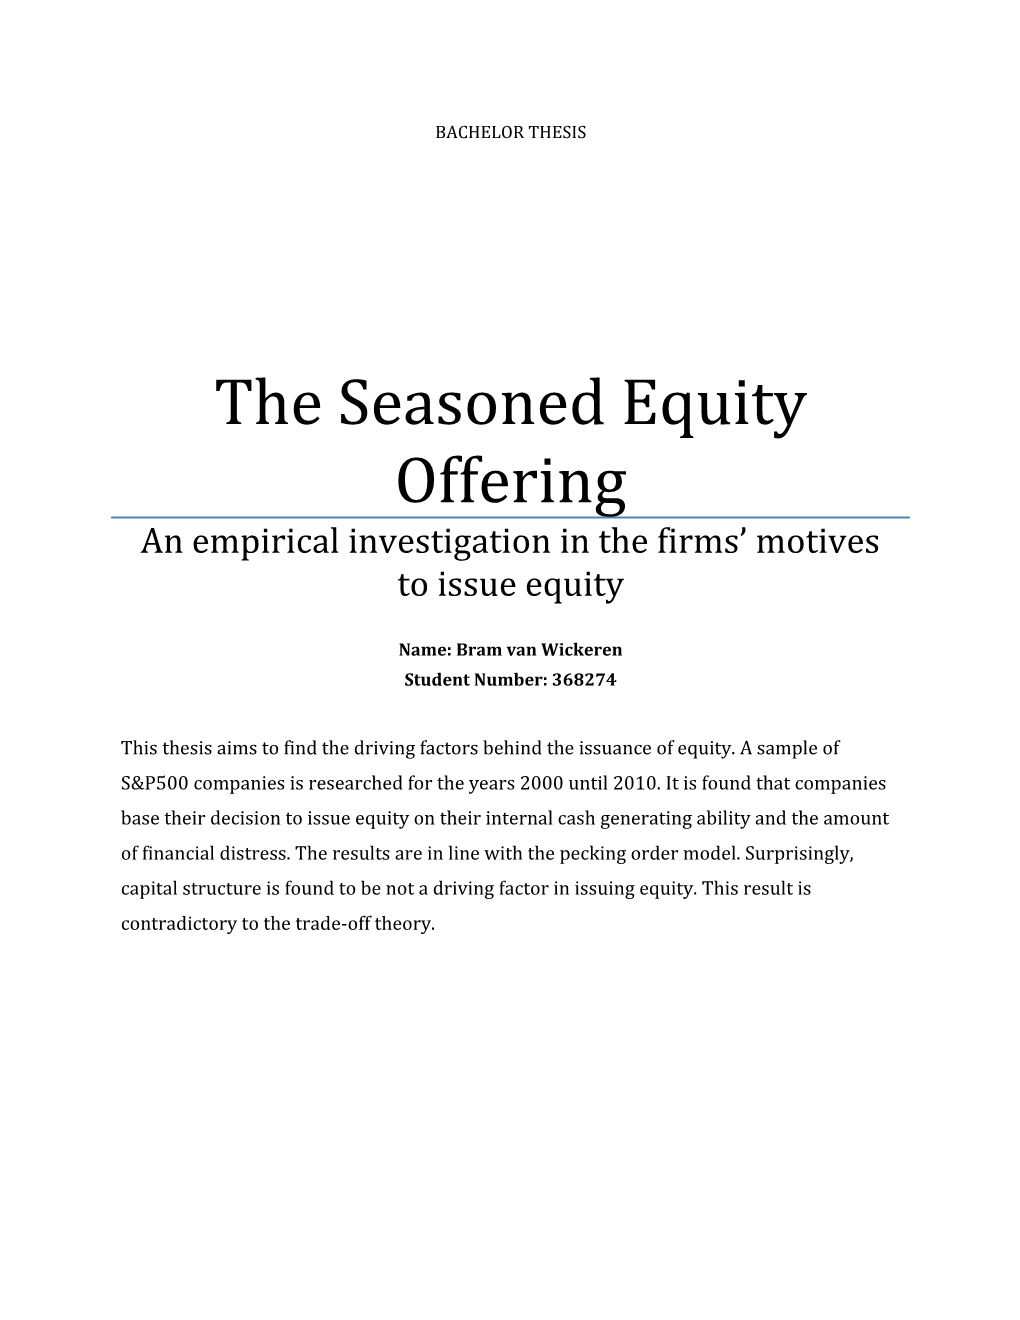 The Seasoned Equity Offering